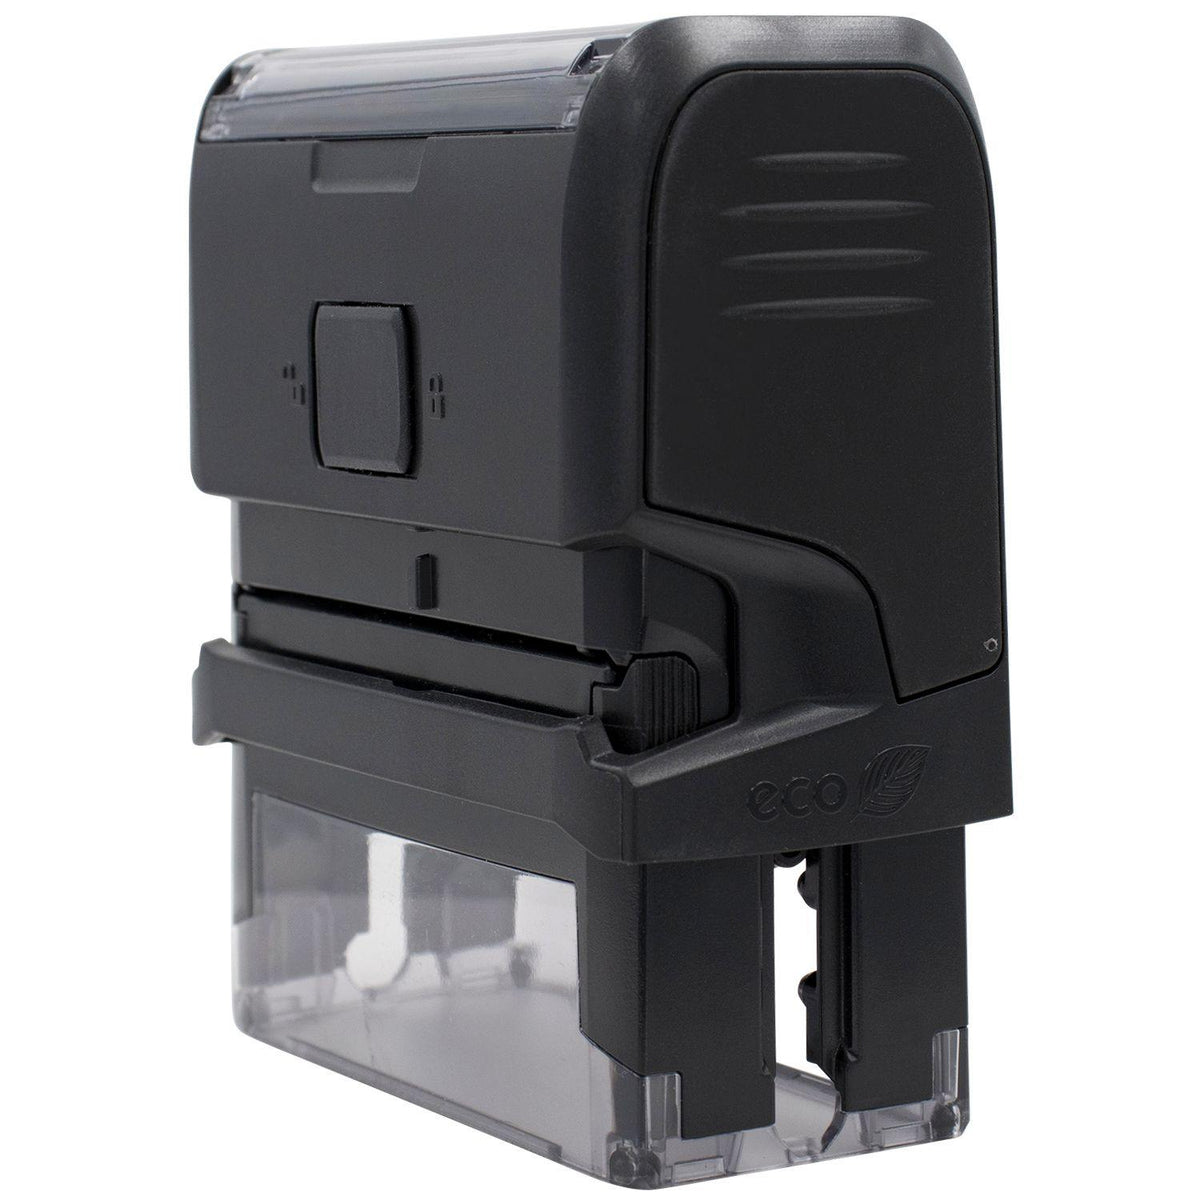 Self-Inking Confidential with Logo Stamp - Engineer Seal Stamps - Brand_Trodat, Impression Size_Small, Stamp Type_Self-Inking Stamp, Type of Use_Business, Type of Use_Legal, Type of Use_Office